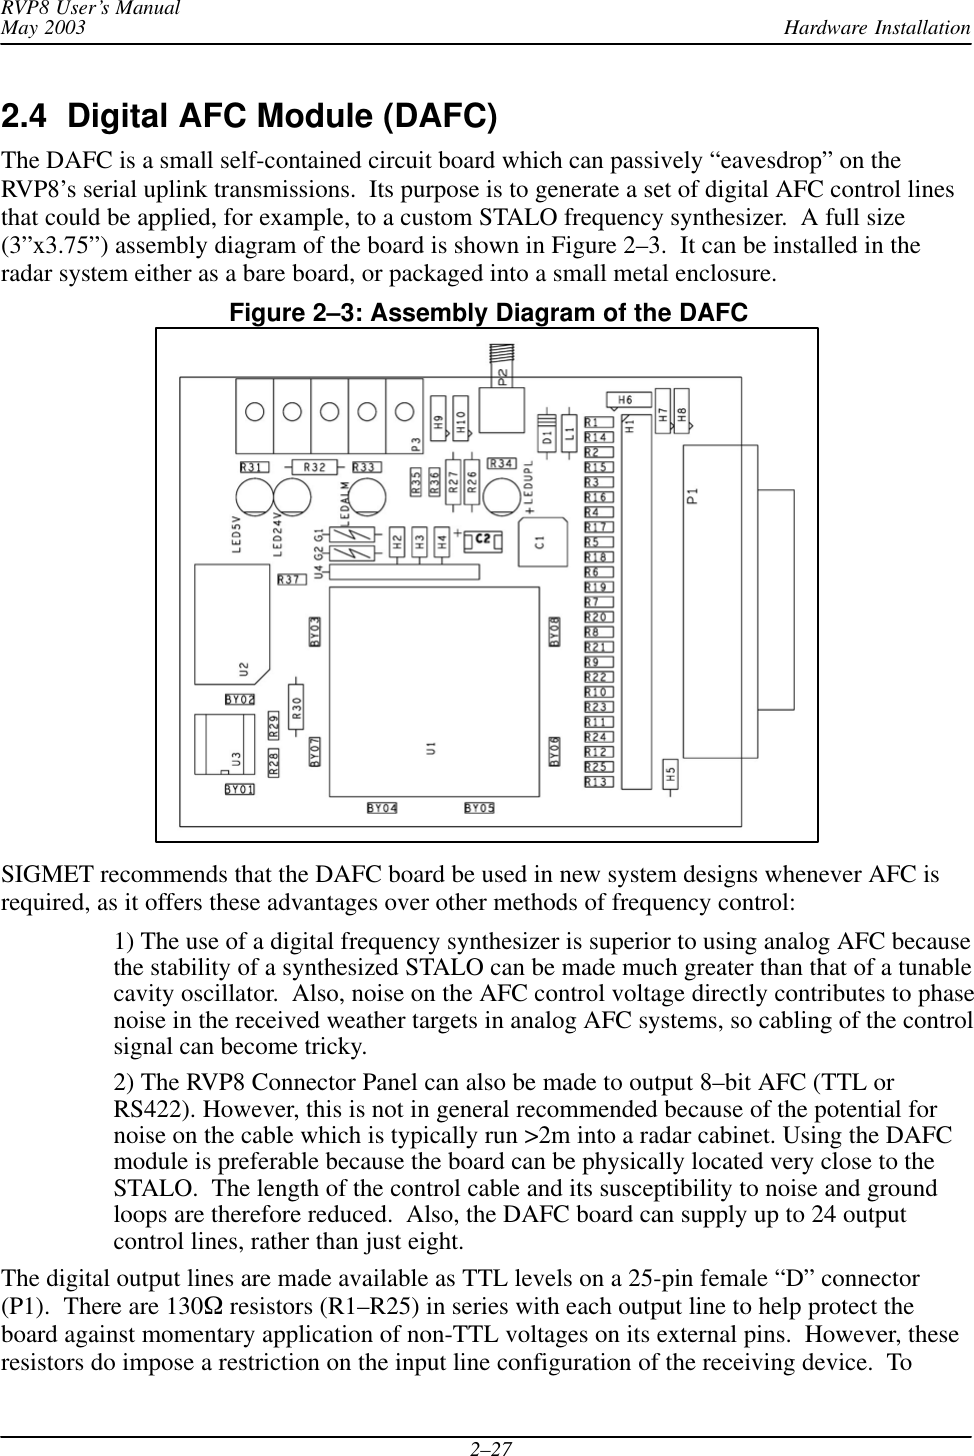 Hardware InstallationRVP8 User’s ManualMay 20032–272.4  Digital AFC Module (DAFC)The DAFC is a small self-contained circuit board which can passively “eavesdrop” on theRVP8’s serial uplink transmissions.  Its purpose is to generate a set of digital AFC control linesthat could be applied, for example, to a custom STALO frequency synthesizer.  A full size(3”x3.75”) assembly diagram of the board is shown in Figure 2–3.  It can be installed in theradar system either as a bare board, or packaged into a small metal enclosure.Figure 2–3: Assembly Diagram of the DAFCSIGMET recommends that the DAFC board be used in new system designs whenever AFC isrequired, as it offers these advantages over other methods of frequency control:1) The use of a digital frequency synthesizer is superior to using analog AFC becausethe stability of a synthesized STALO can be made much greater than that of a tunablecavity oscillator.  Also, noise on the AFC control voltage directly contributes to phasenoise in the received weather targets in analog AFC systems, so cabling of the controlsignal can become tricky.2) The RVP8 Connector Panel can also be made to output 8–bit AFC (TTL orRS422). However, this is not in general recommended because of the potential fornoise on the cable which is typically run &gt;2m into a radar cabinet. Using the DAFCmodule is preferable because the board can be physically located very close to theSTALO.  The length of the control cable and its susceptibility to noise and groundloops are therefore reduced.  Also, the DAFC board can supply up to 24 outputcontrol lines, rather than just eight.The digital output lines are made available as TTL levels on a 25-pin female “D” connector(P1).  There are 130W resistors (R1–R25) in series with each output line to help protect theboard against momentary application of non-TTL voltages on its external pins.  However, theseresistors do impose a restriction on the input line configuration of the receiving device.  To